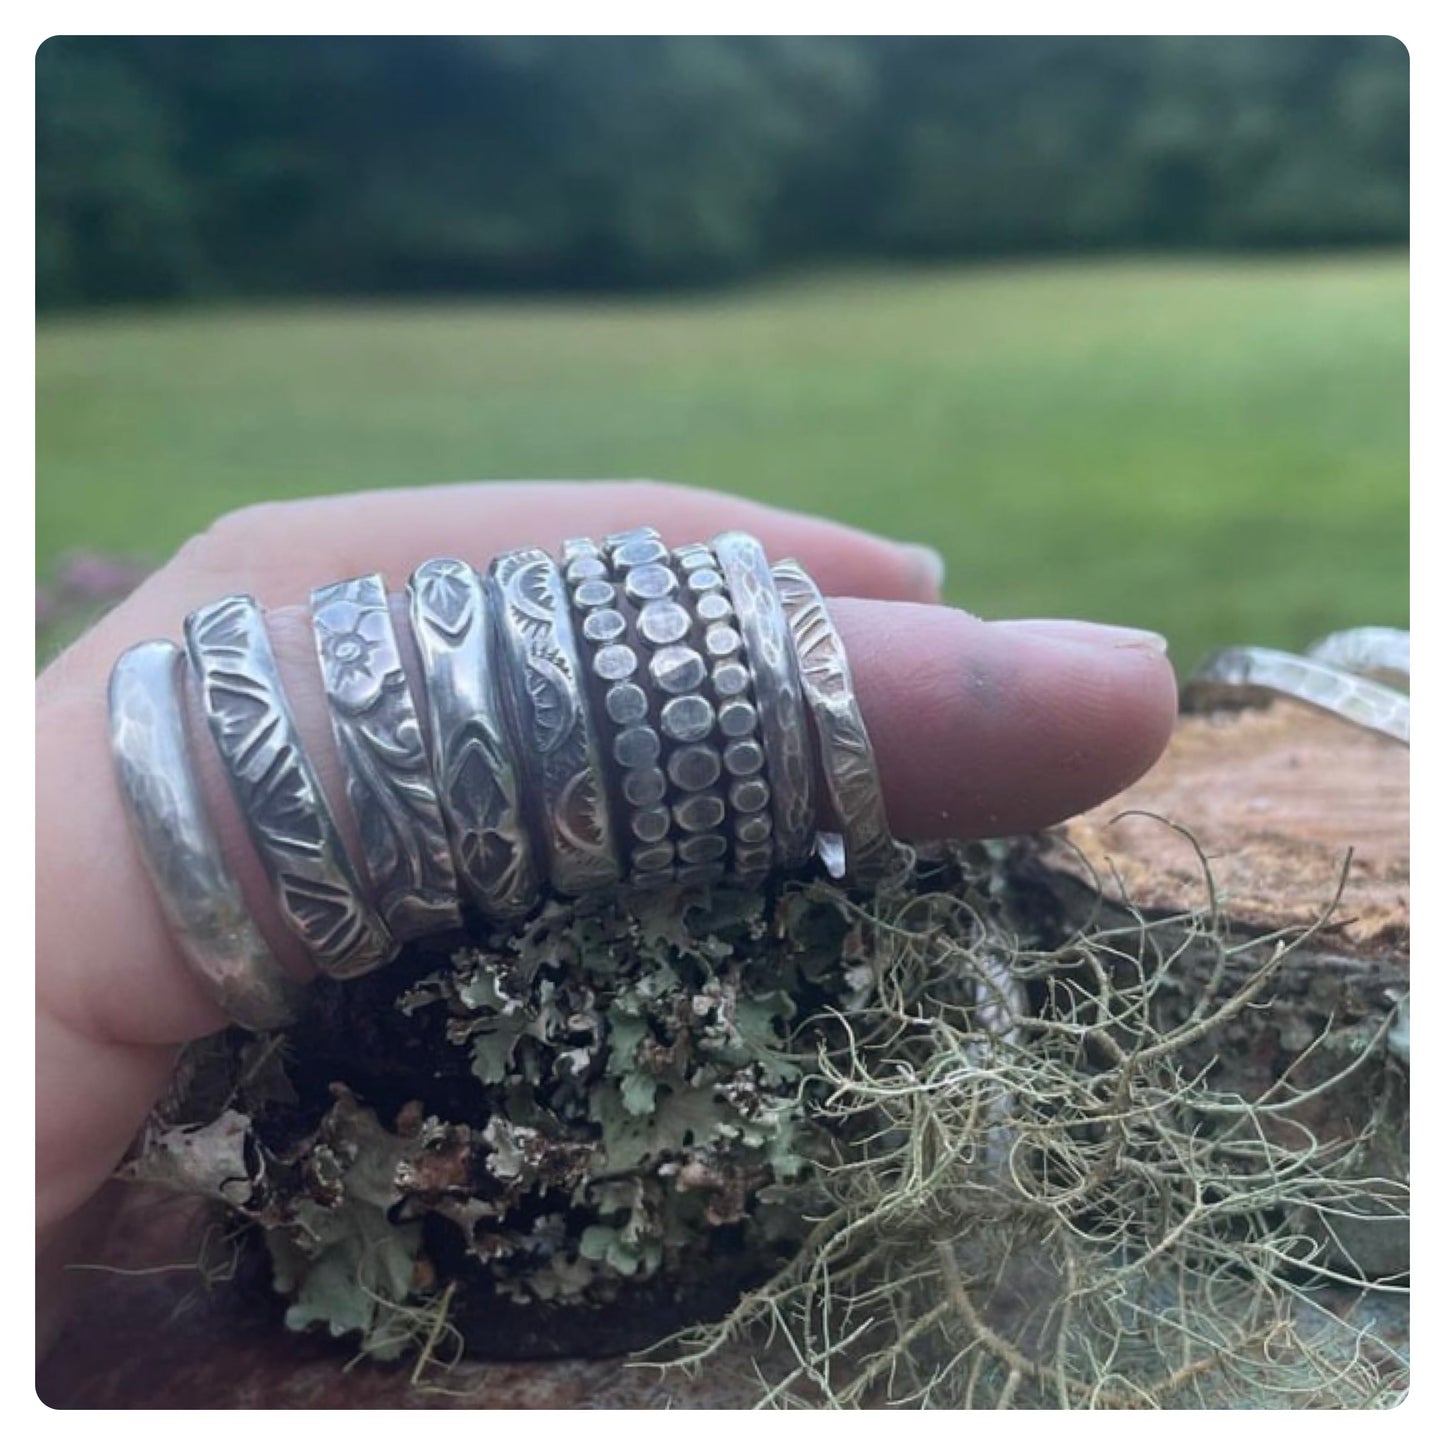 Intro to Silversmithing: Silver Bands August 29th 10am-12pm